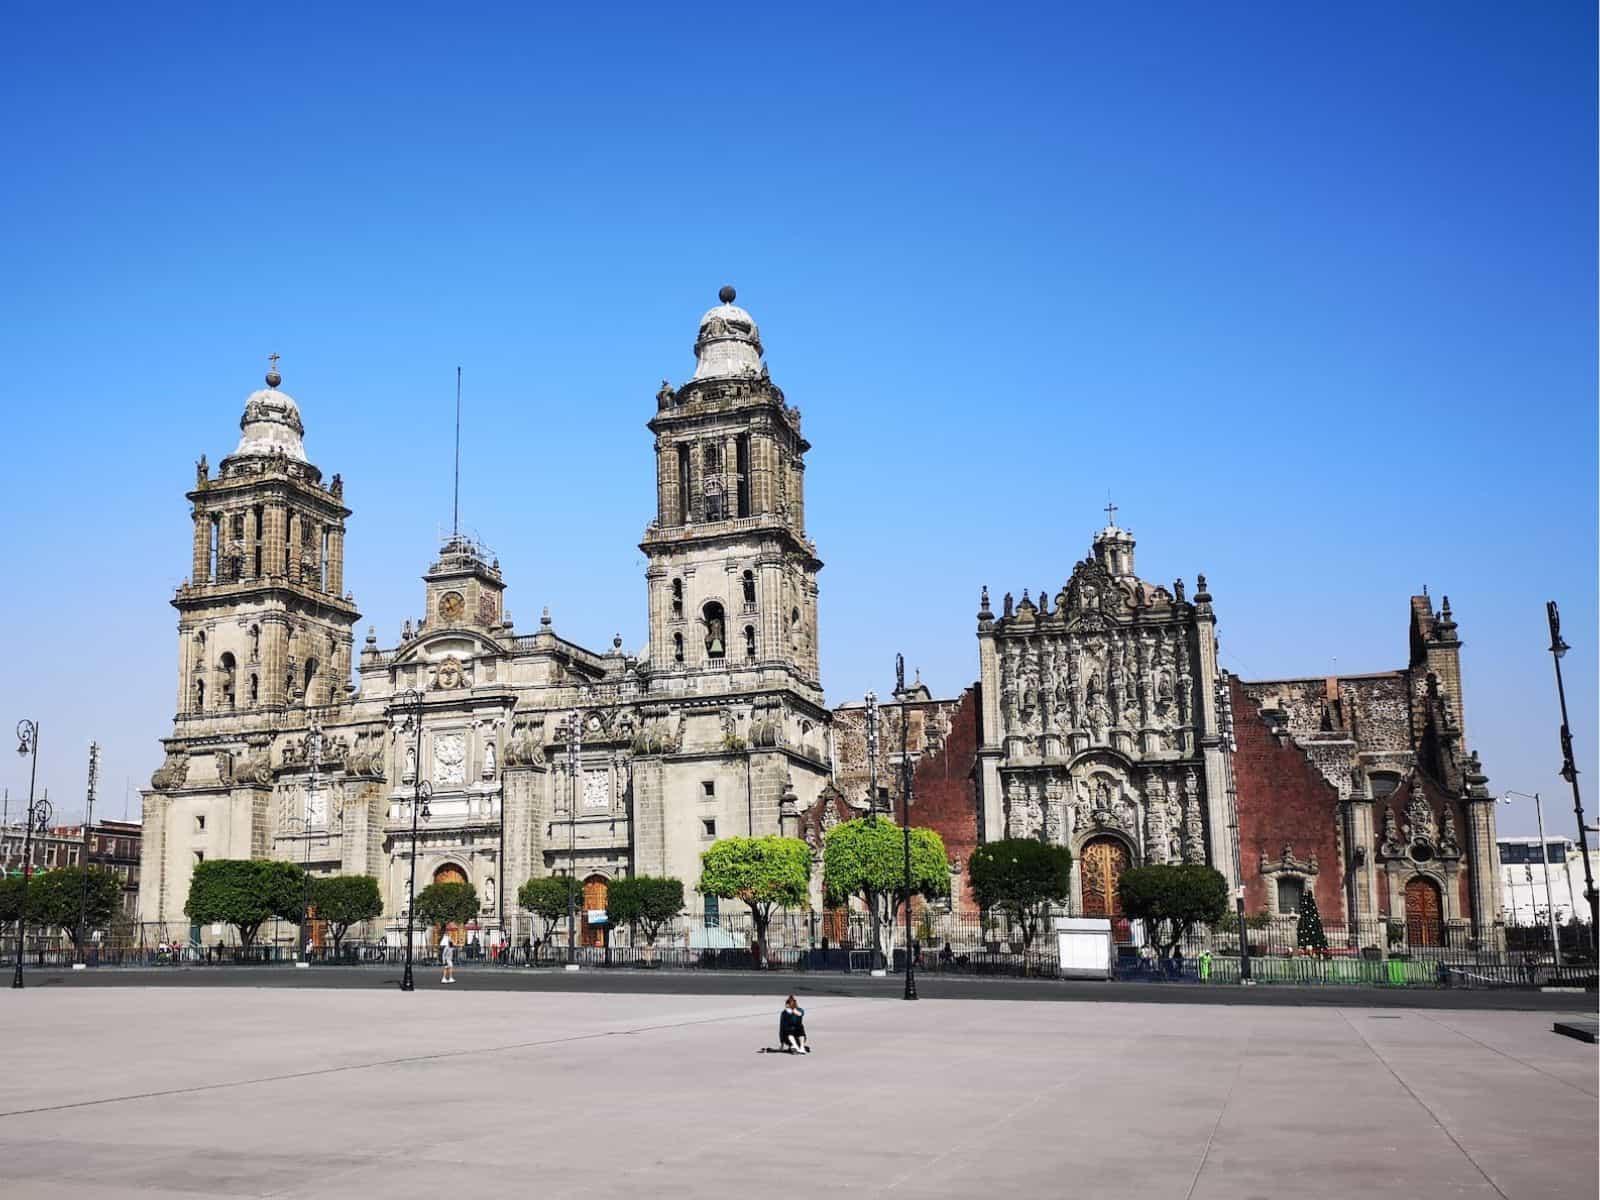 Best things to do in Mexico City Mexico - Alex Veka - Centro Historico by Laurentiu Morariu on Unsplash